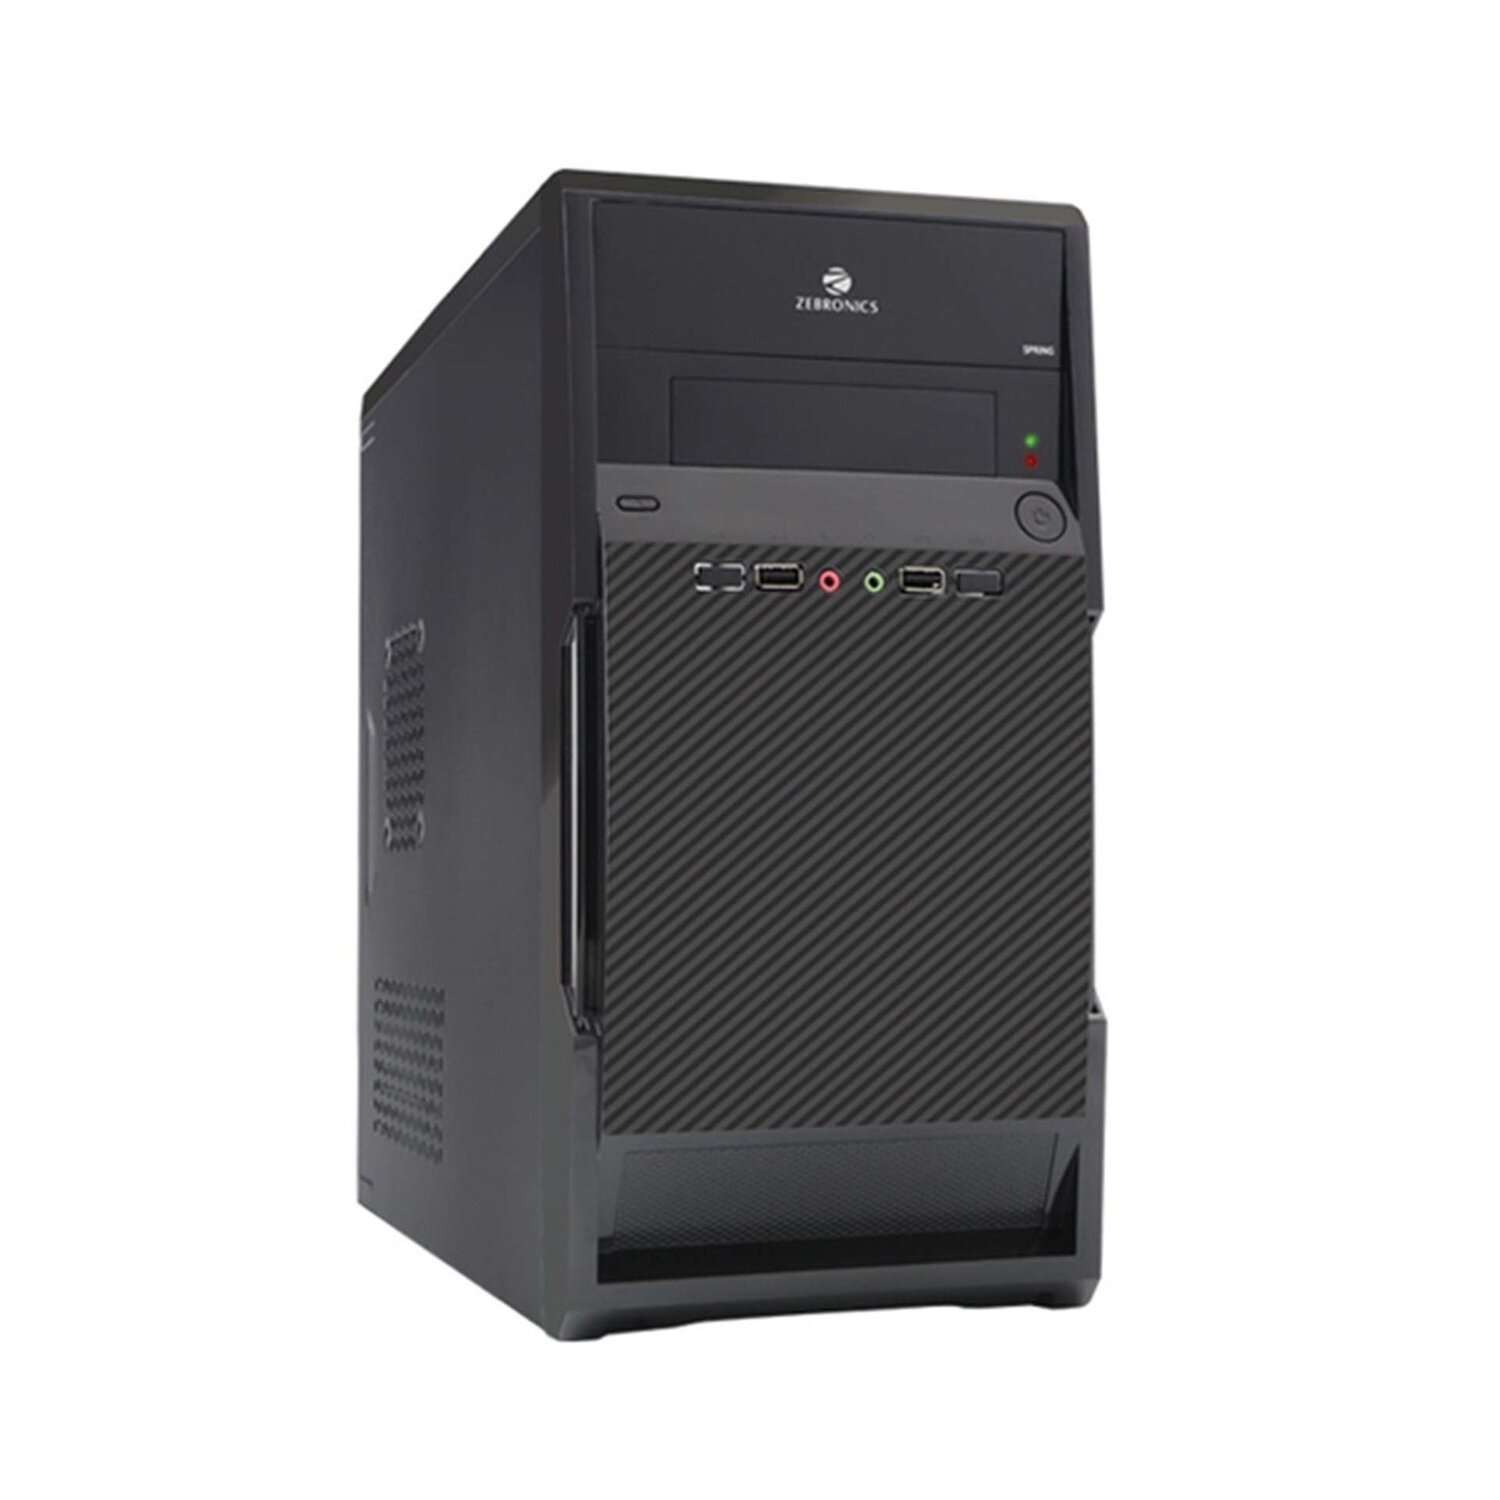 Core I5-650 3.2Ghz Desktop PC for Home & Office - 4GB RAM / 120GB SSD / 500GB HDD